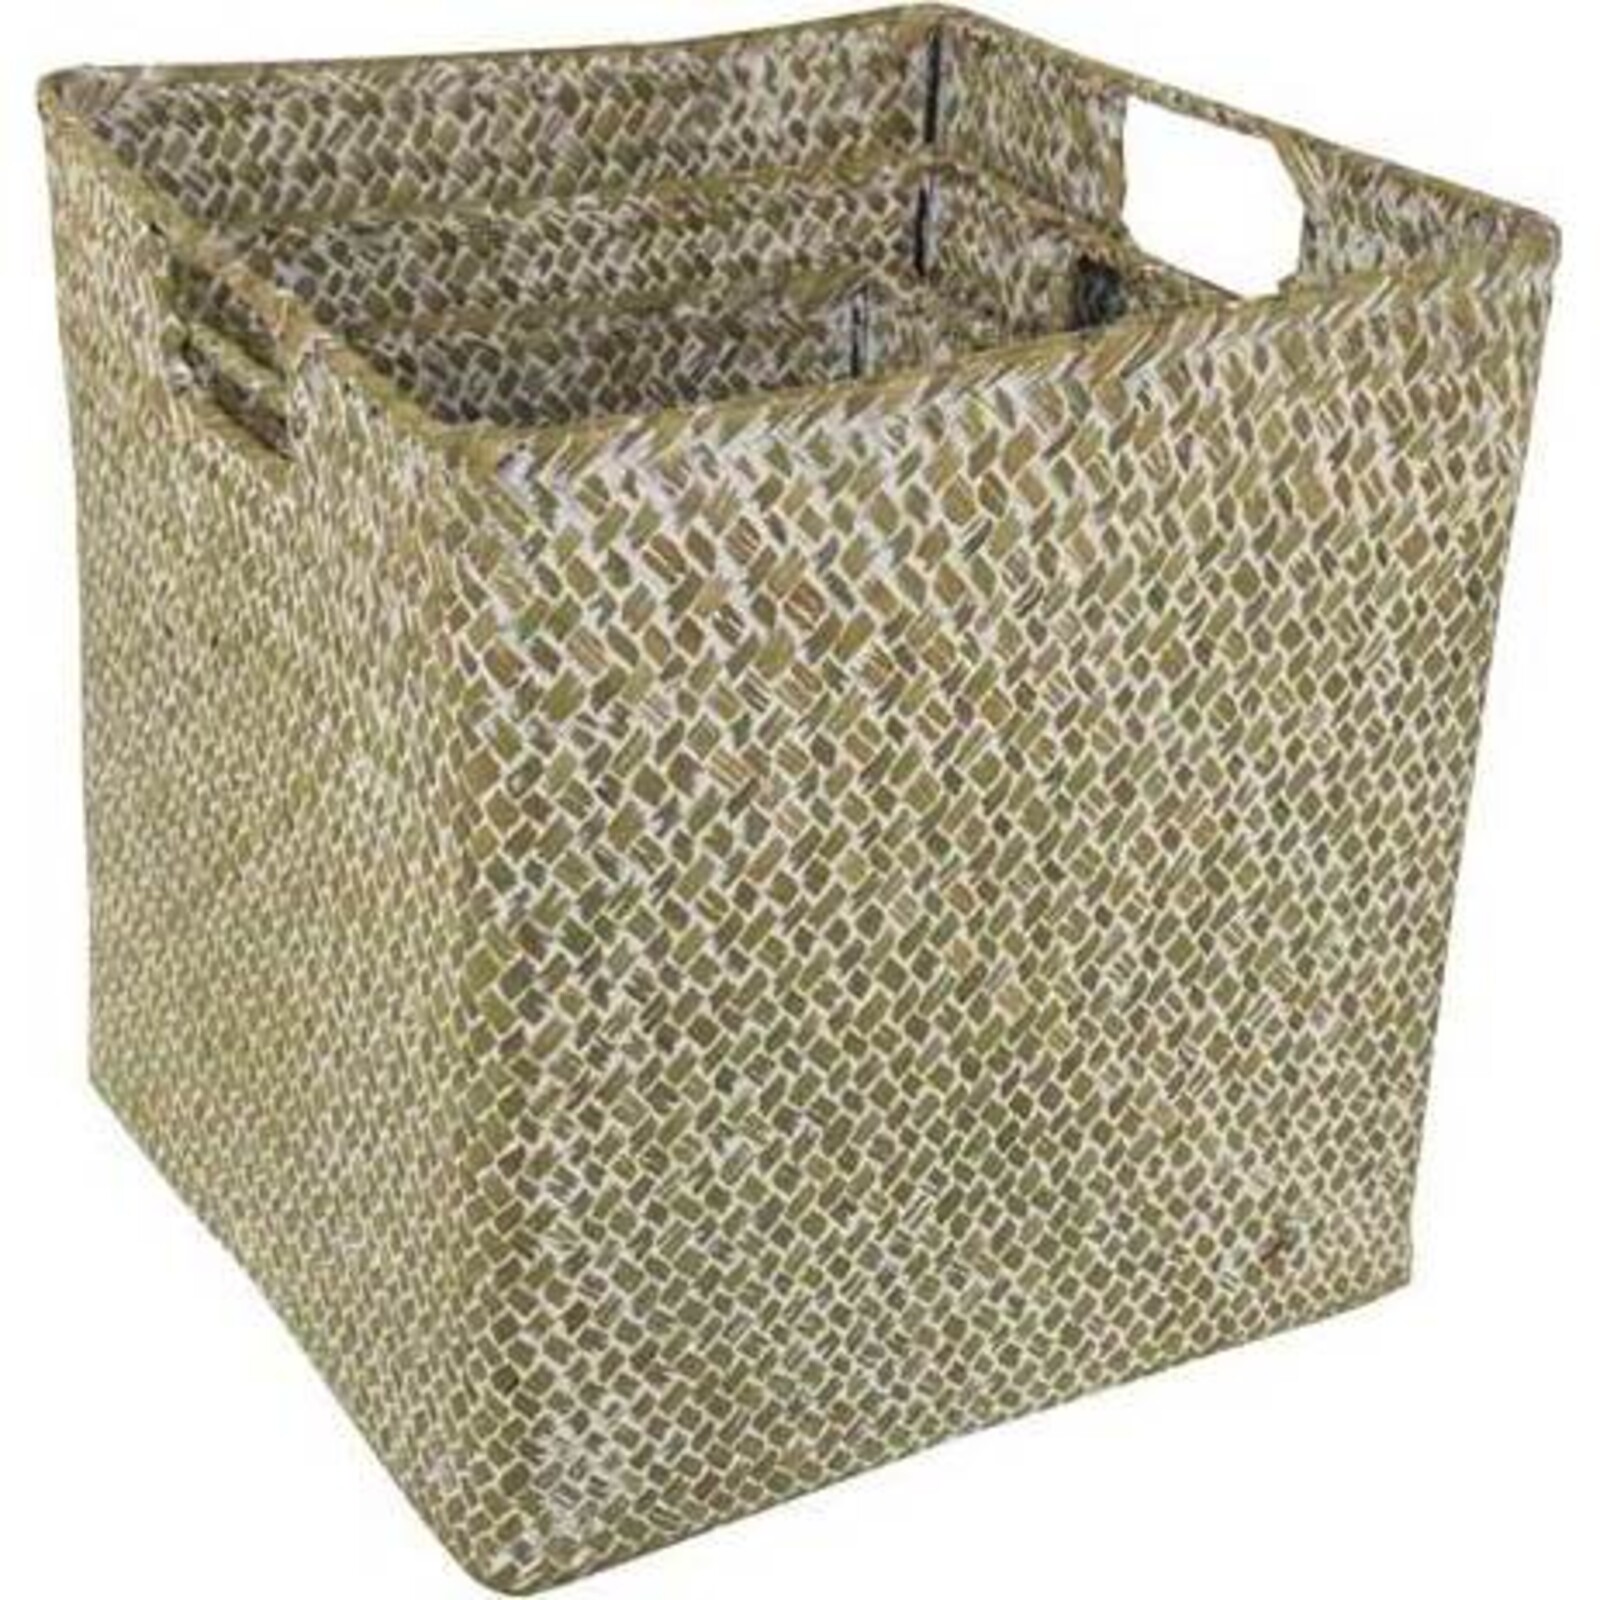 Woven Basket Square S/3